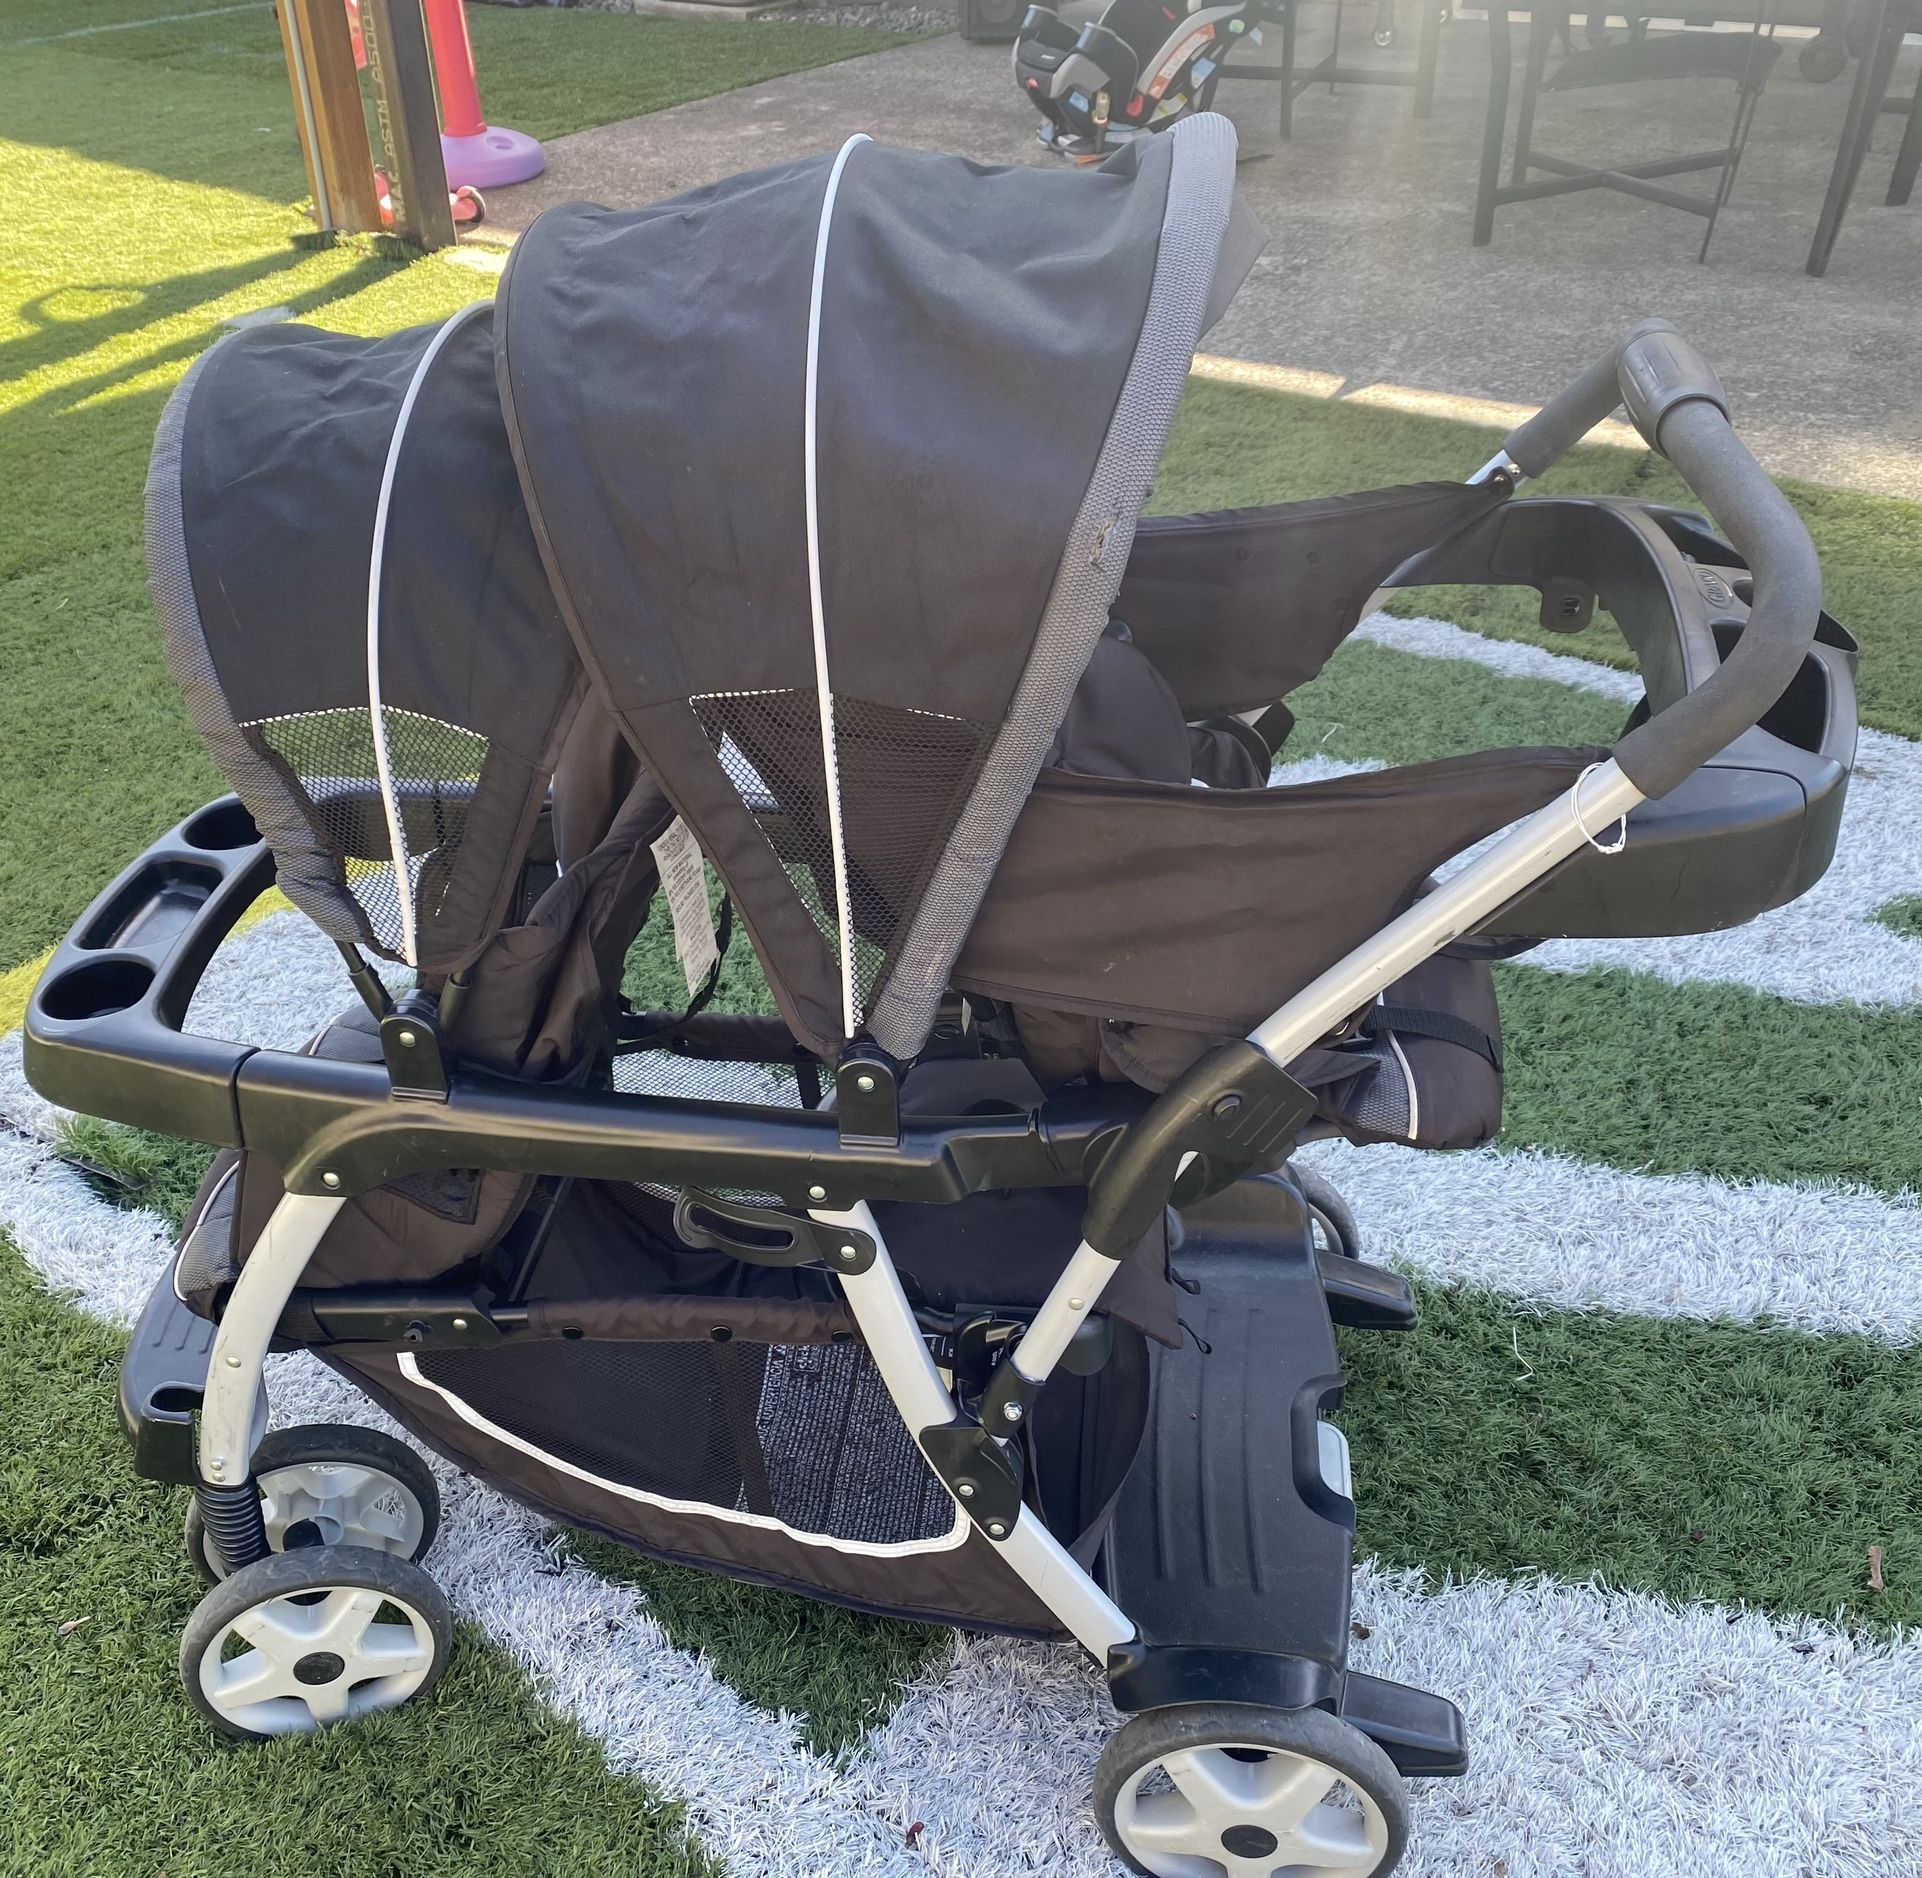 Graco Ready2Grow LX Stroller | 12 Riding Options | Accepts 2 Graco SnugRide Infant Car Seats